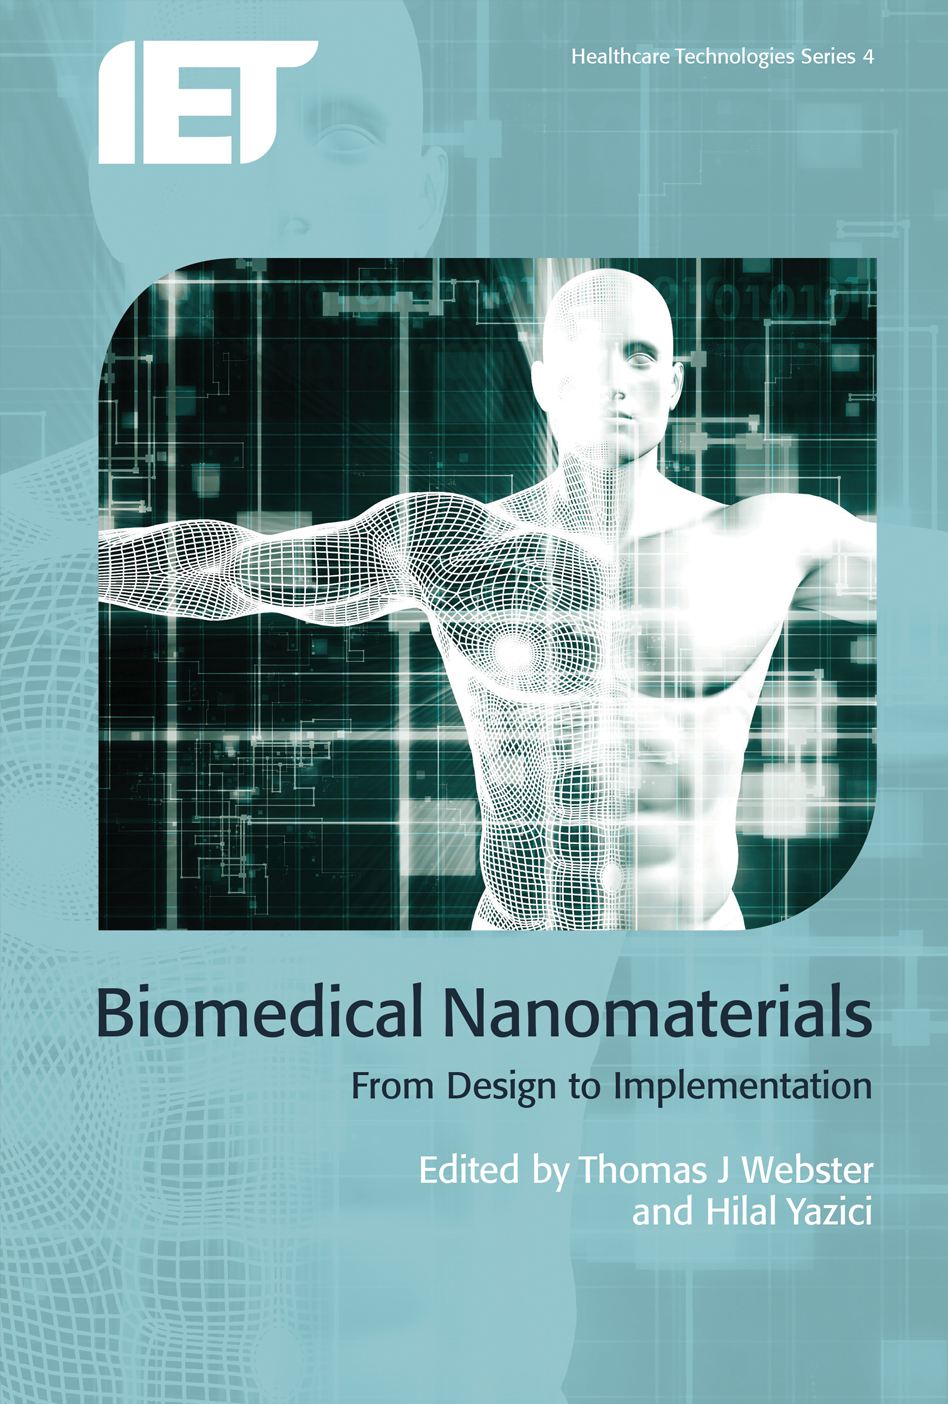 Biomedical Nanomaterials, From design to implementation